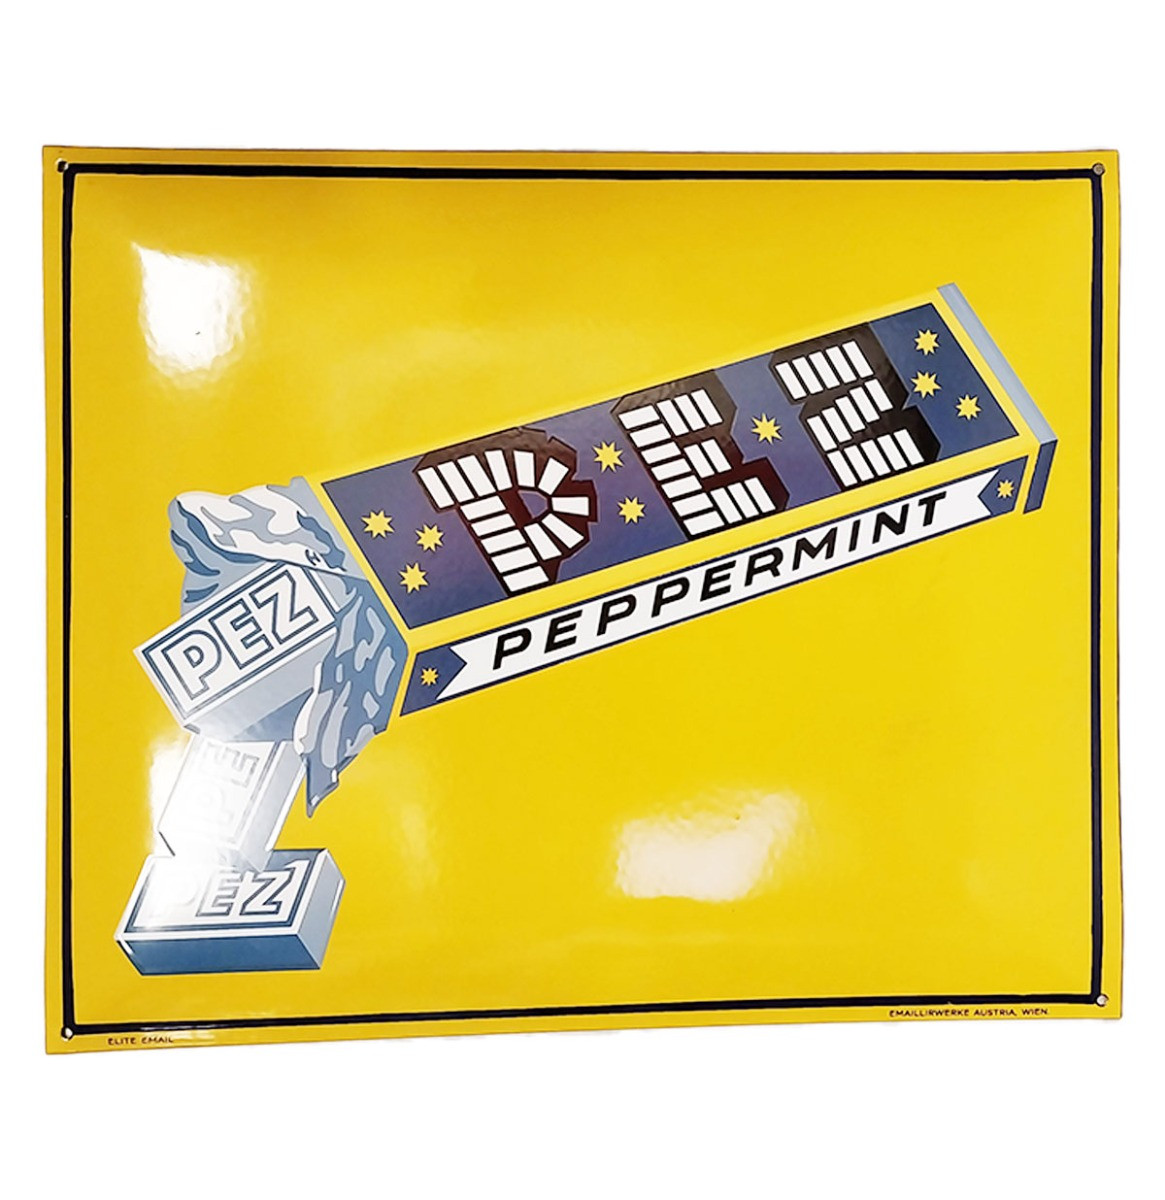 Pez Peppermint Emaille Bord - 60 x 50cm